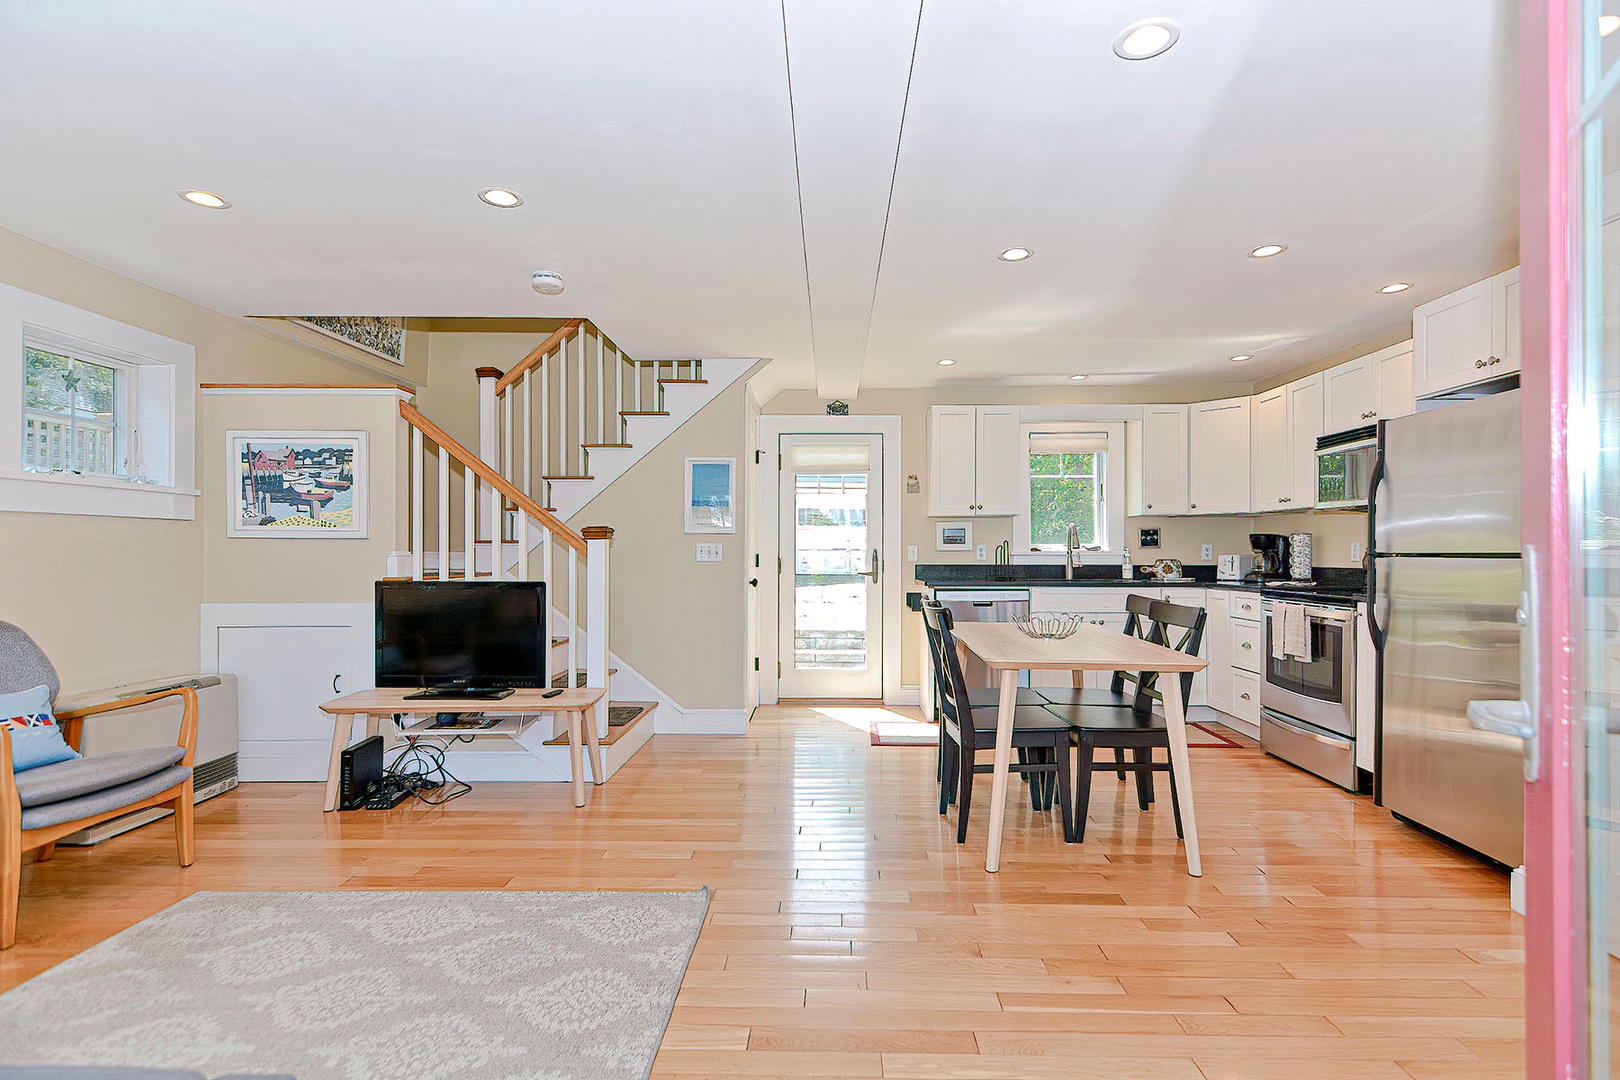 The main level features an open floor living and dining area.